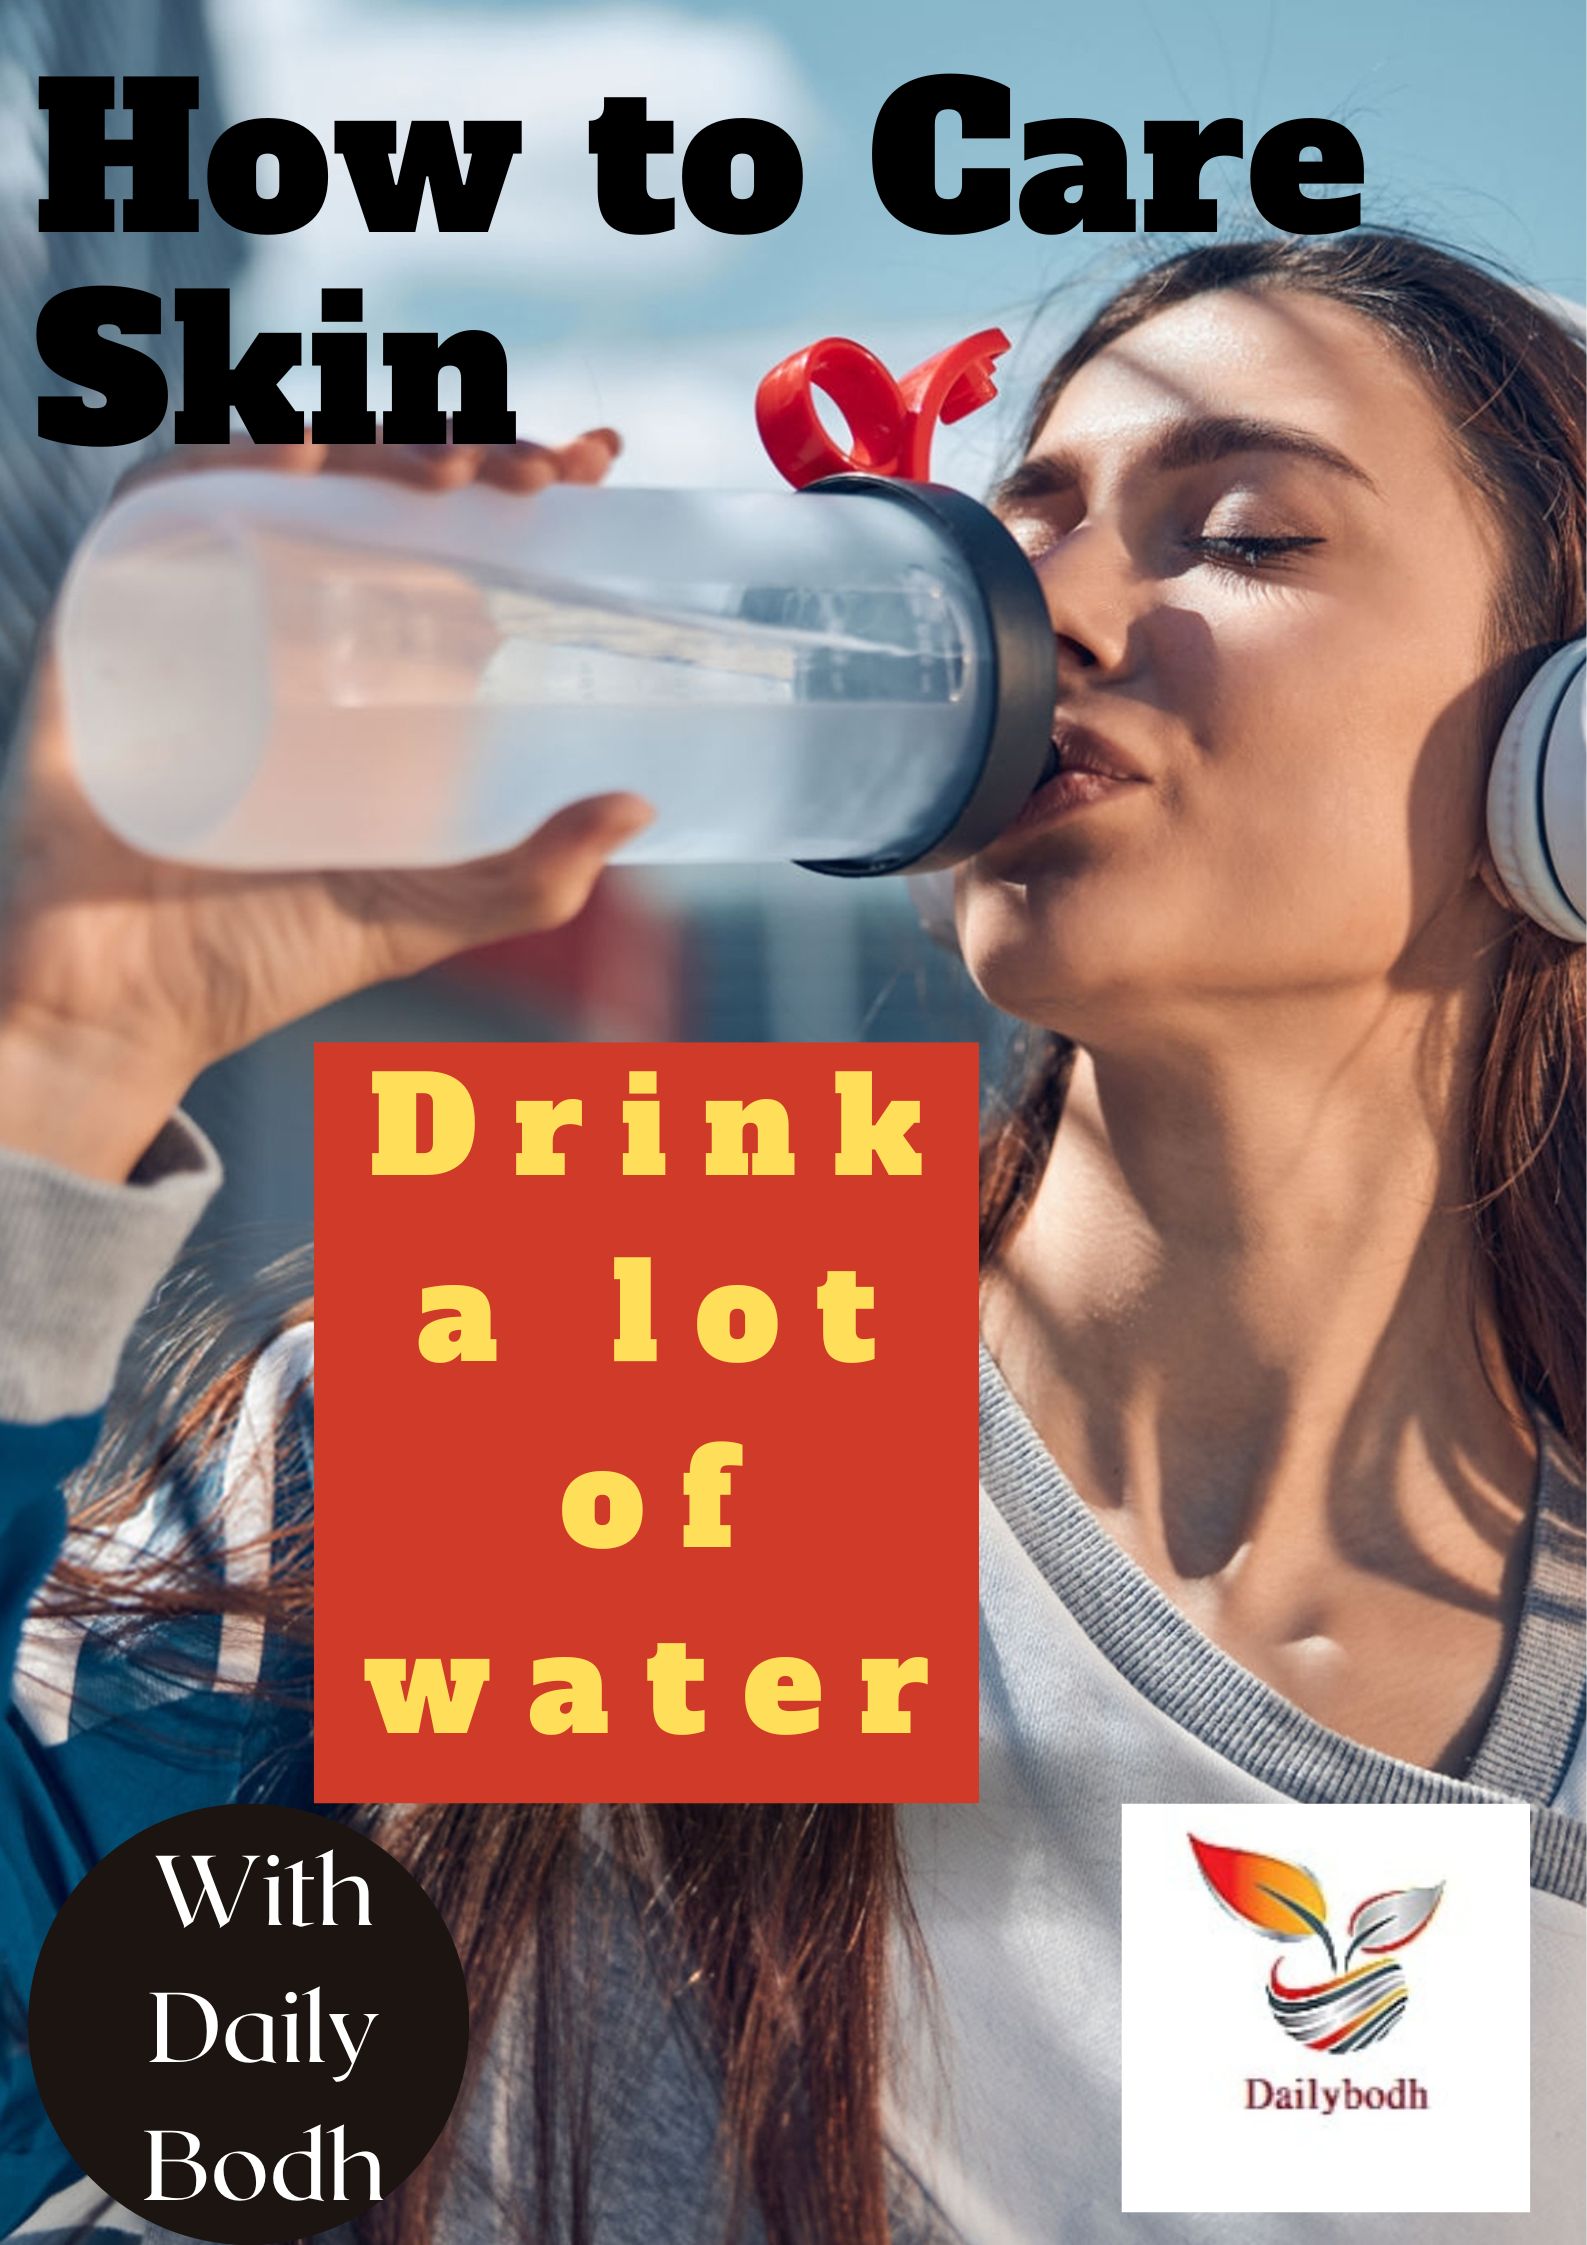 Drink a lot of water (How to Care Skin)